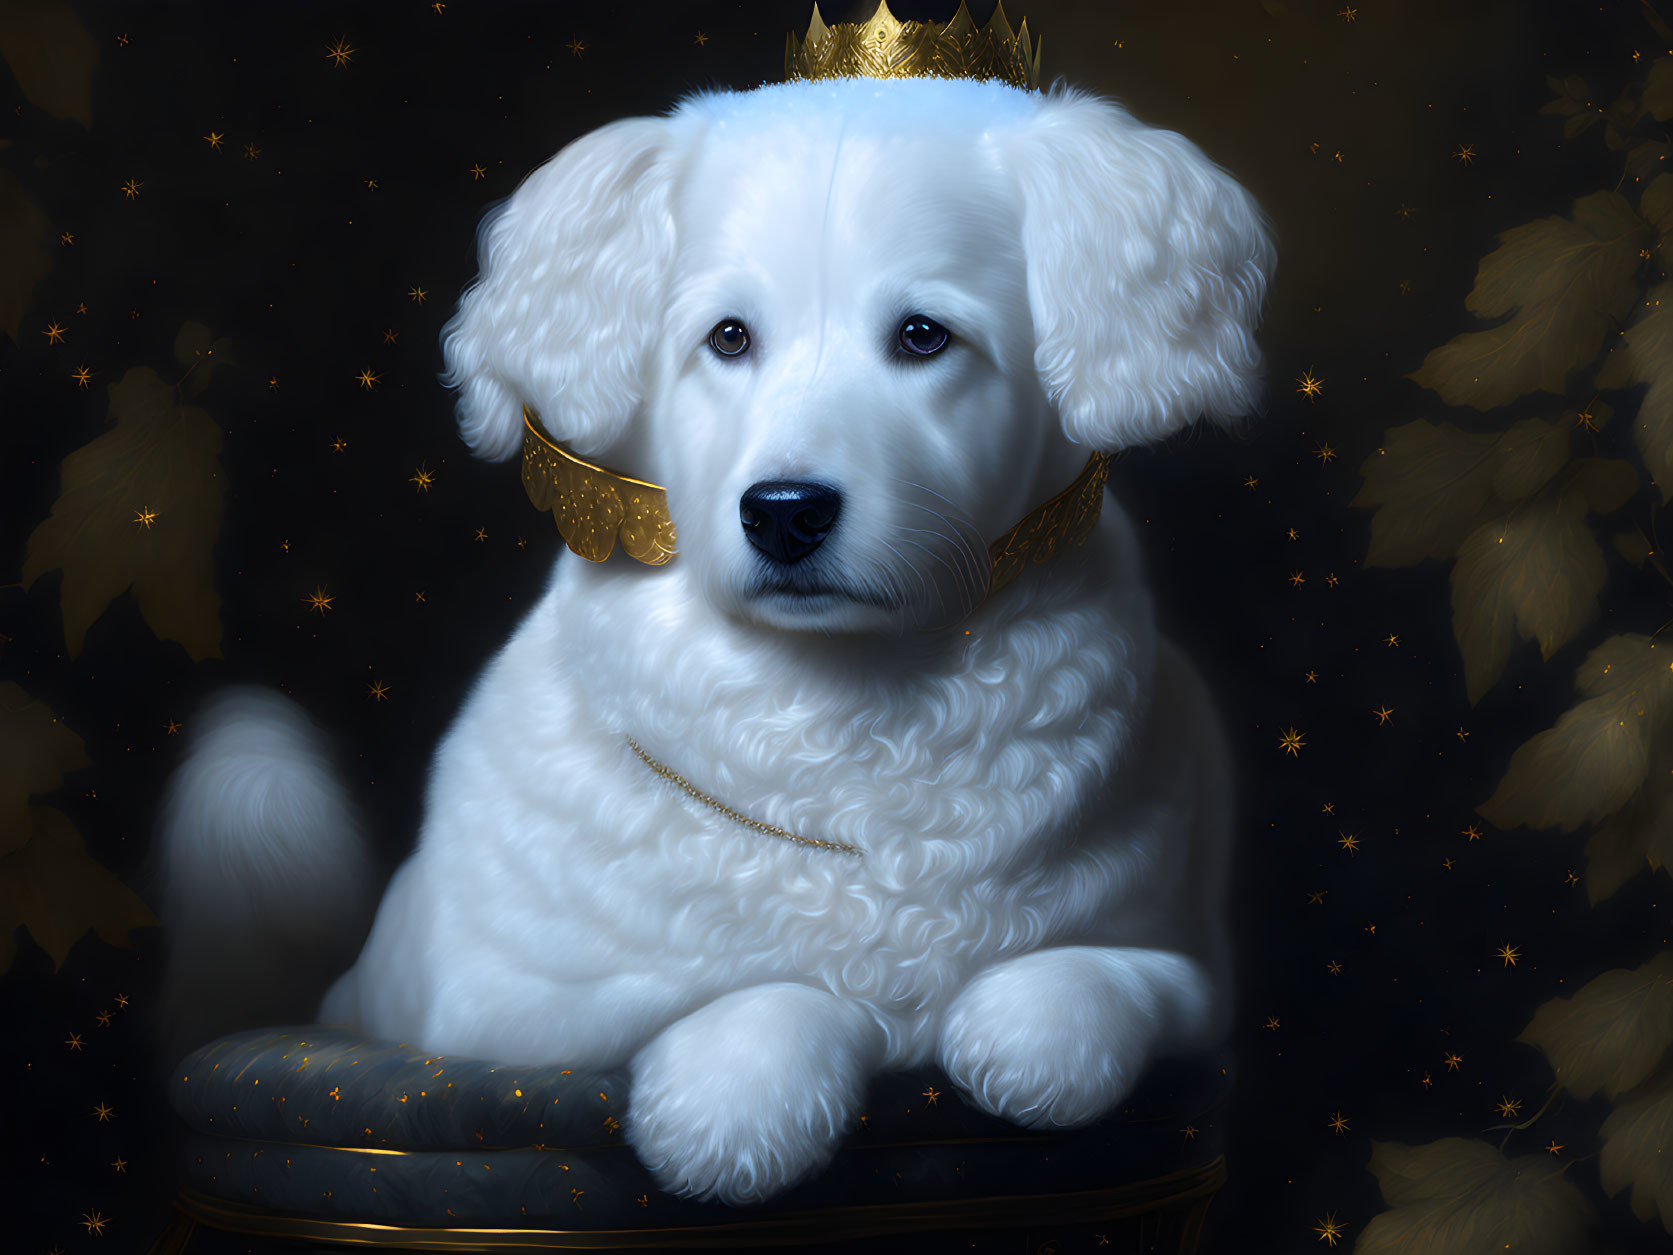 White Puppy with Golden Crown and Pendant on Throne in Starry Background